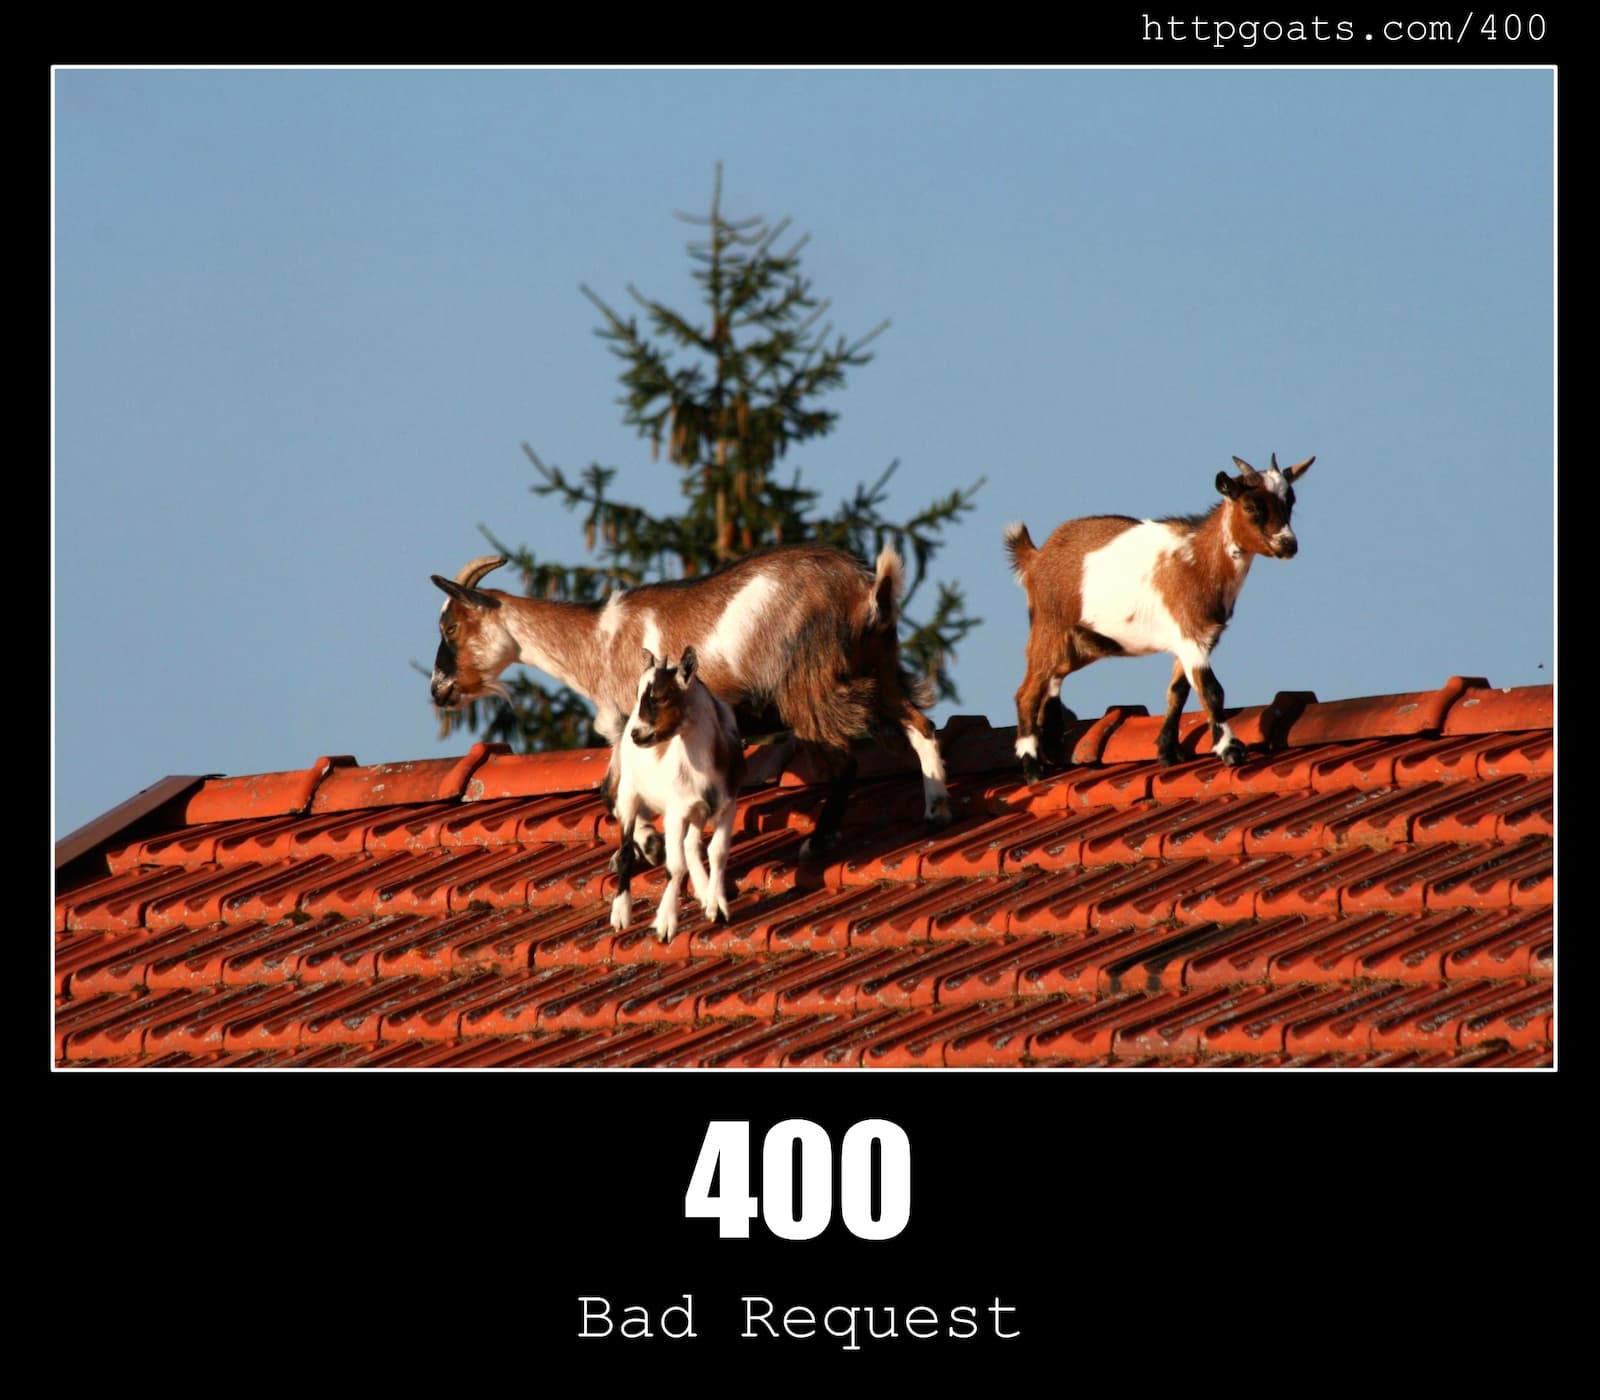 HTTP Status Code 400 Bad Request & Goats